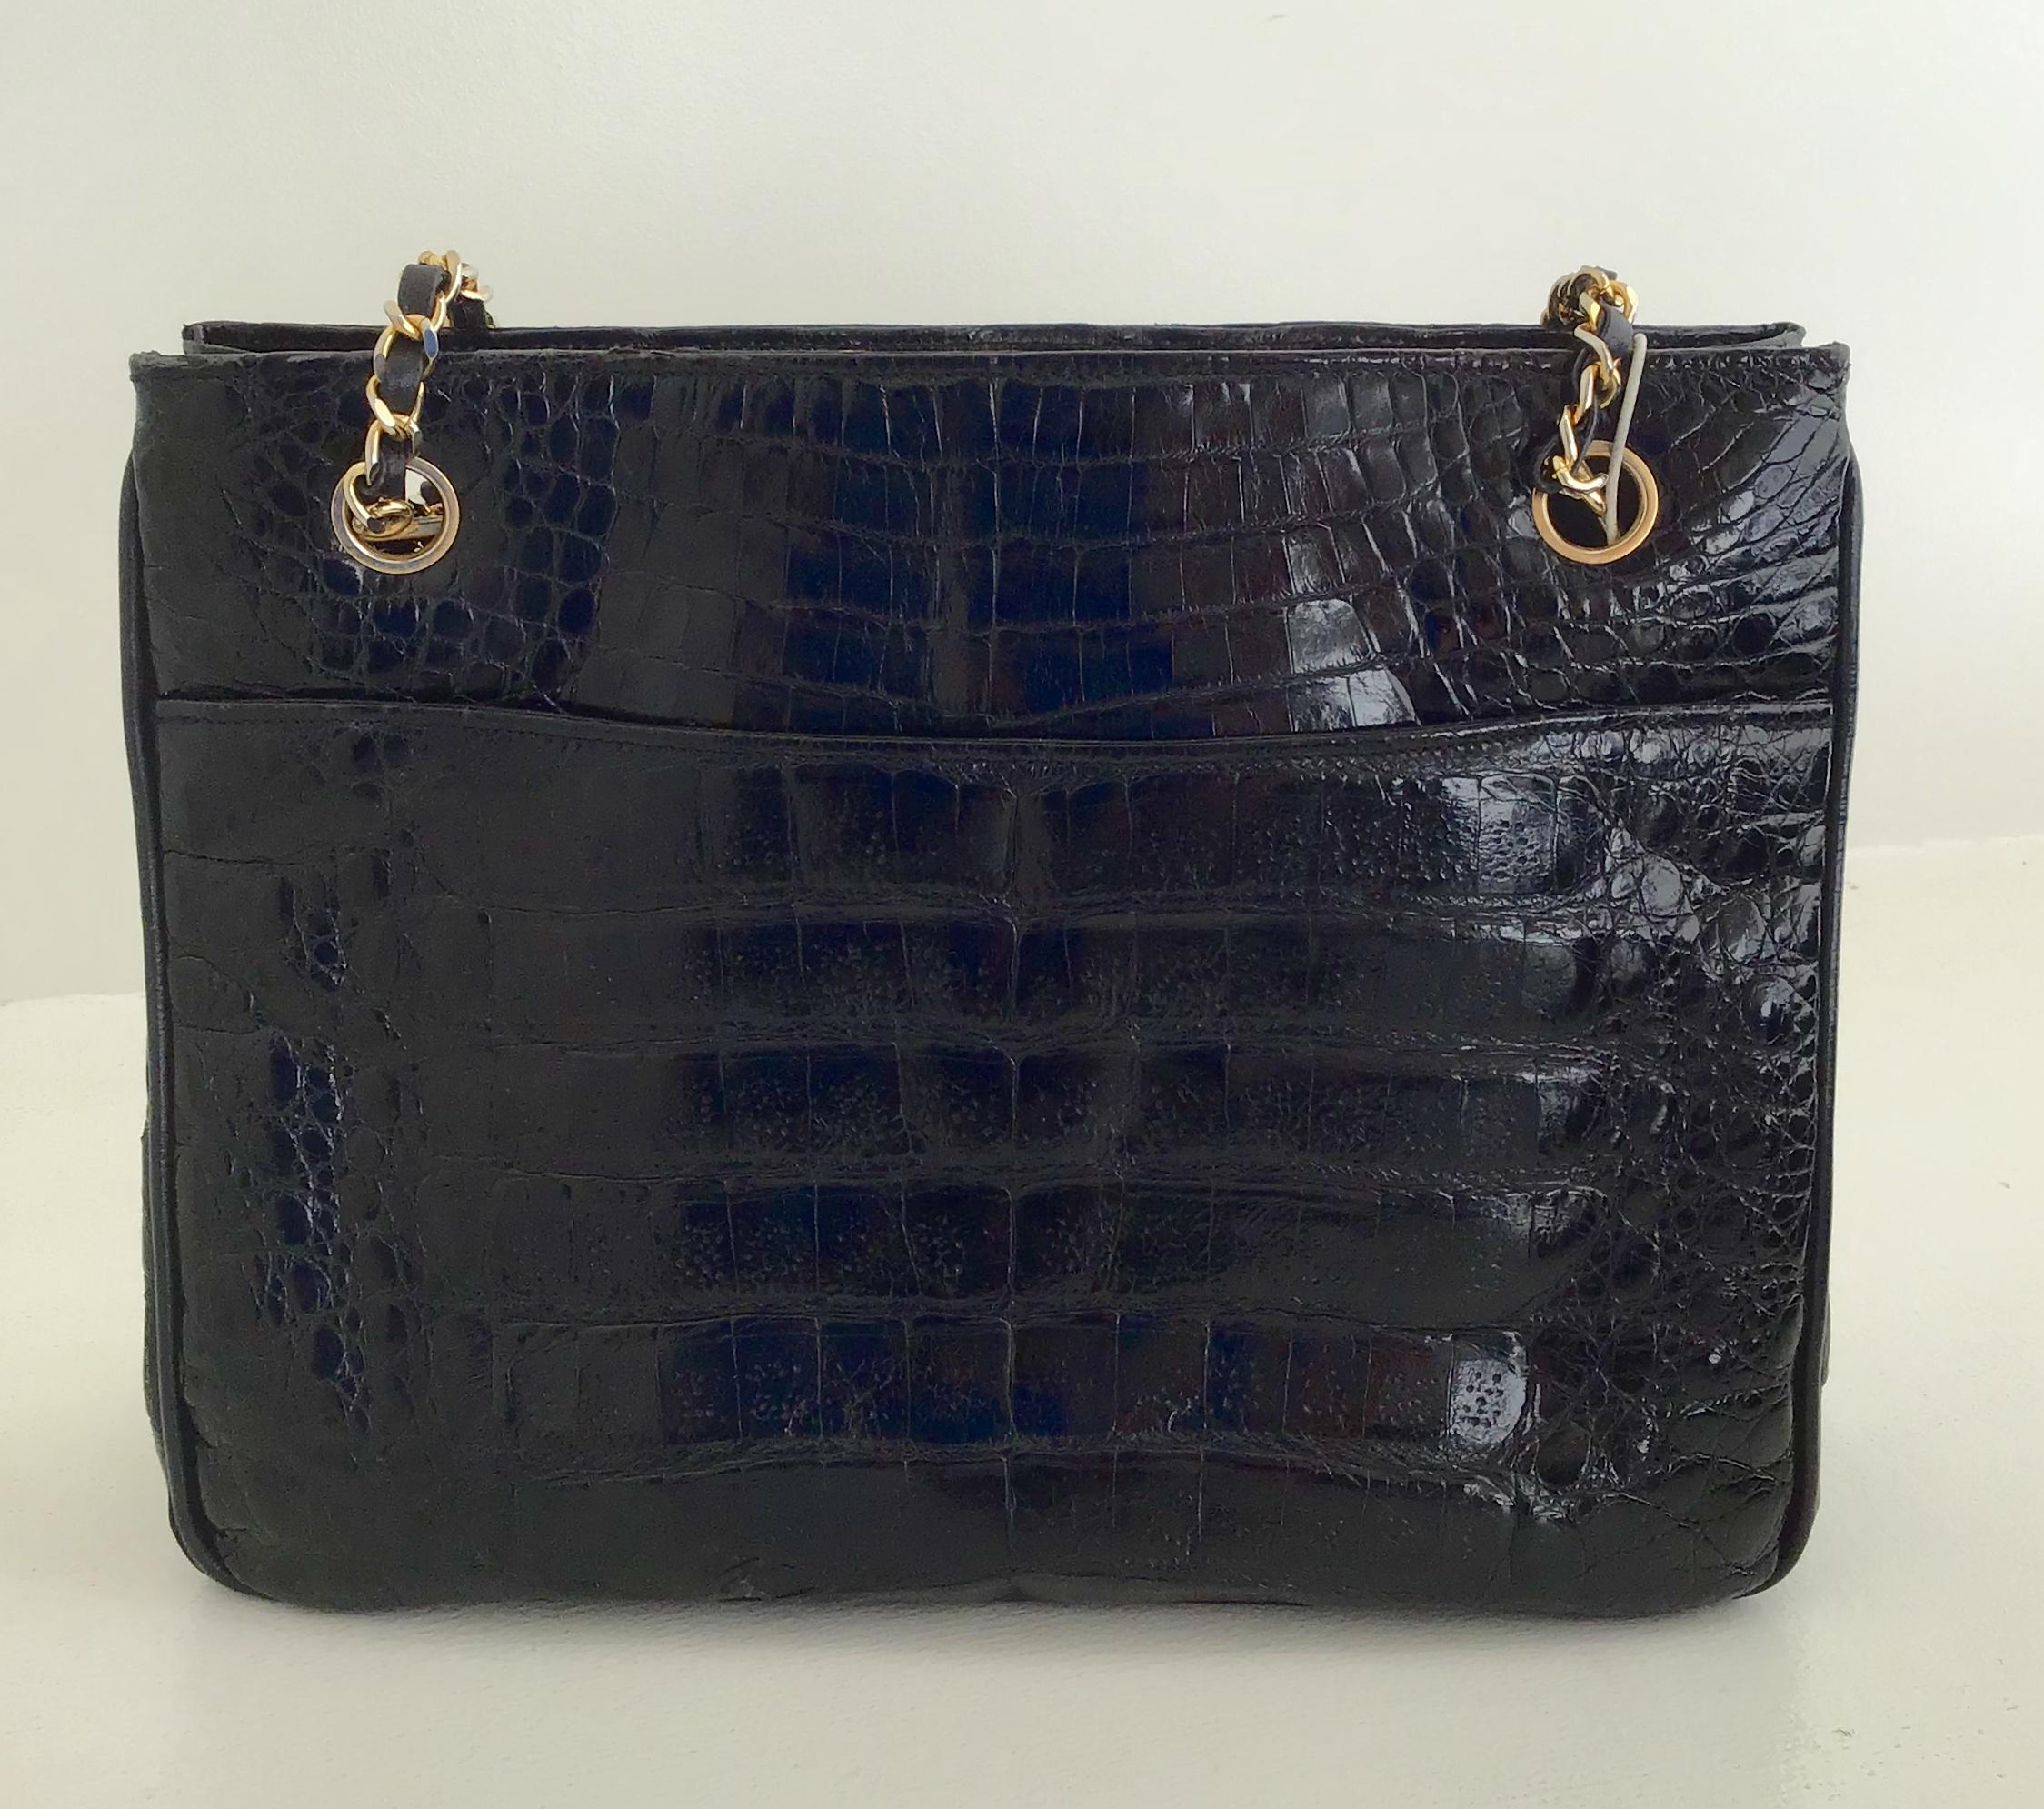 Chanel Black Alligator Handbag. The leather-through-chain handle ends in a round piece of alligator leather adorned with a gold metal logo. The interior is lined in black leather and has two zipped pockets, while the front face has a slide pocket.